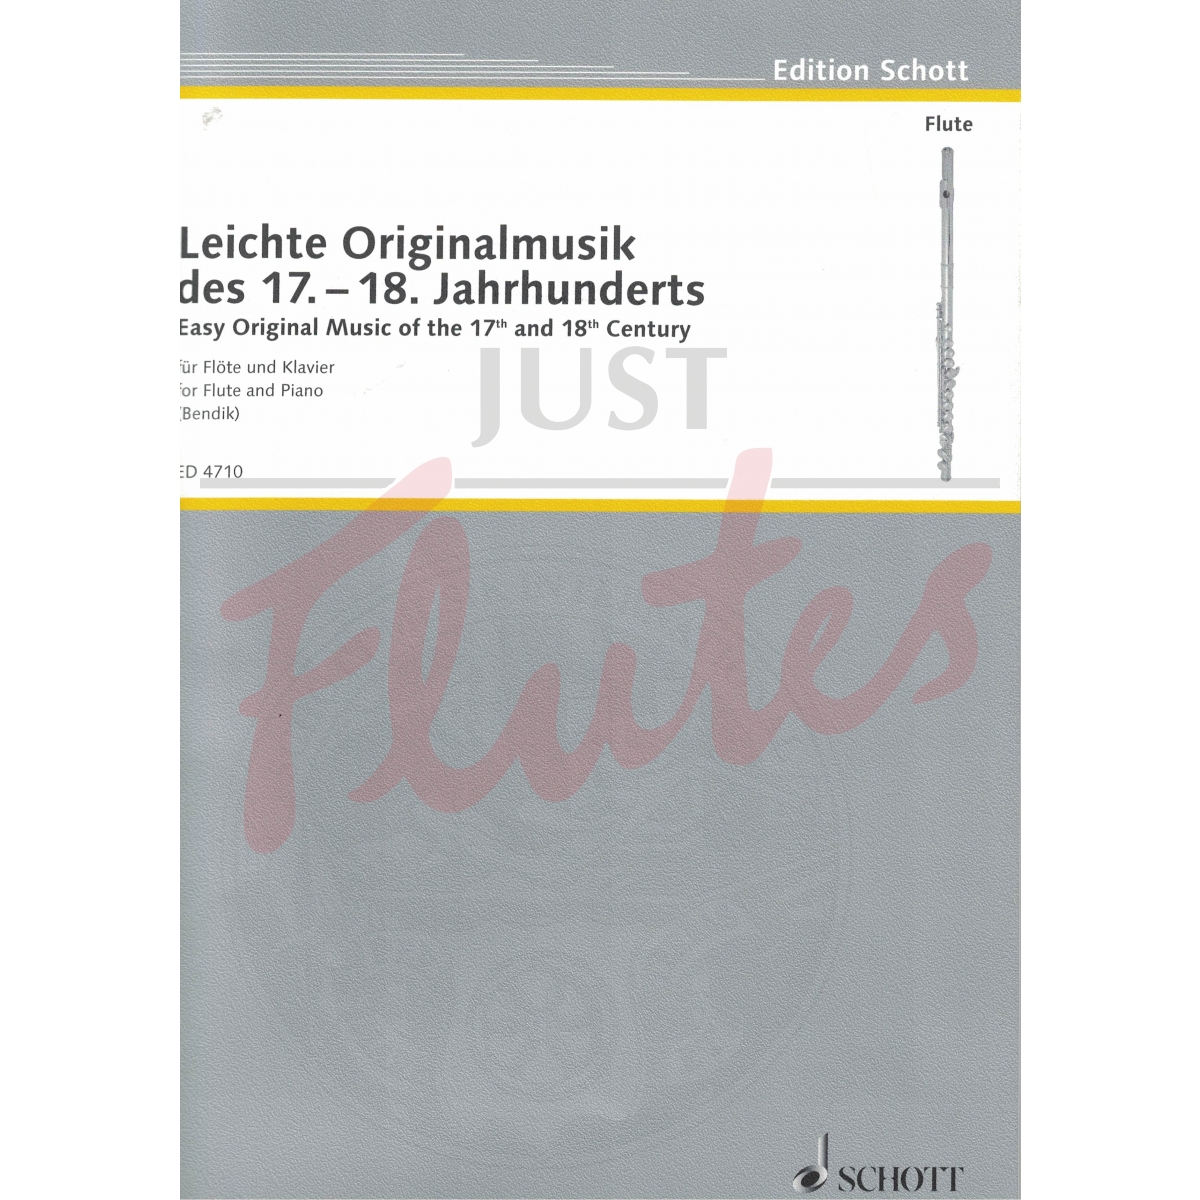 Easy Original Music of 17th and 18th Centuries for Flute and Piano